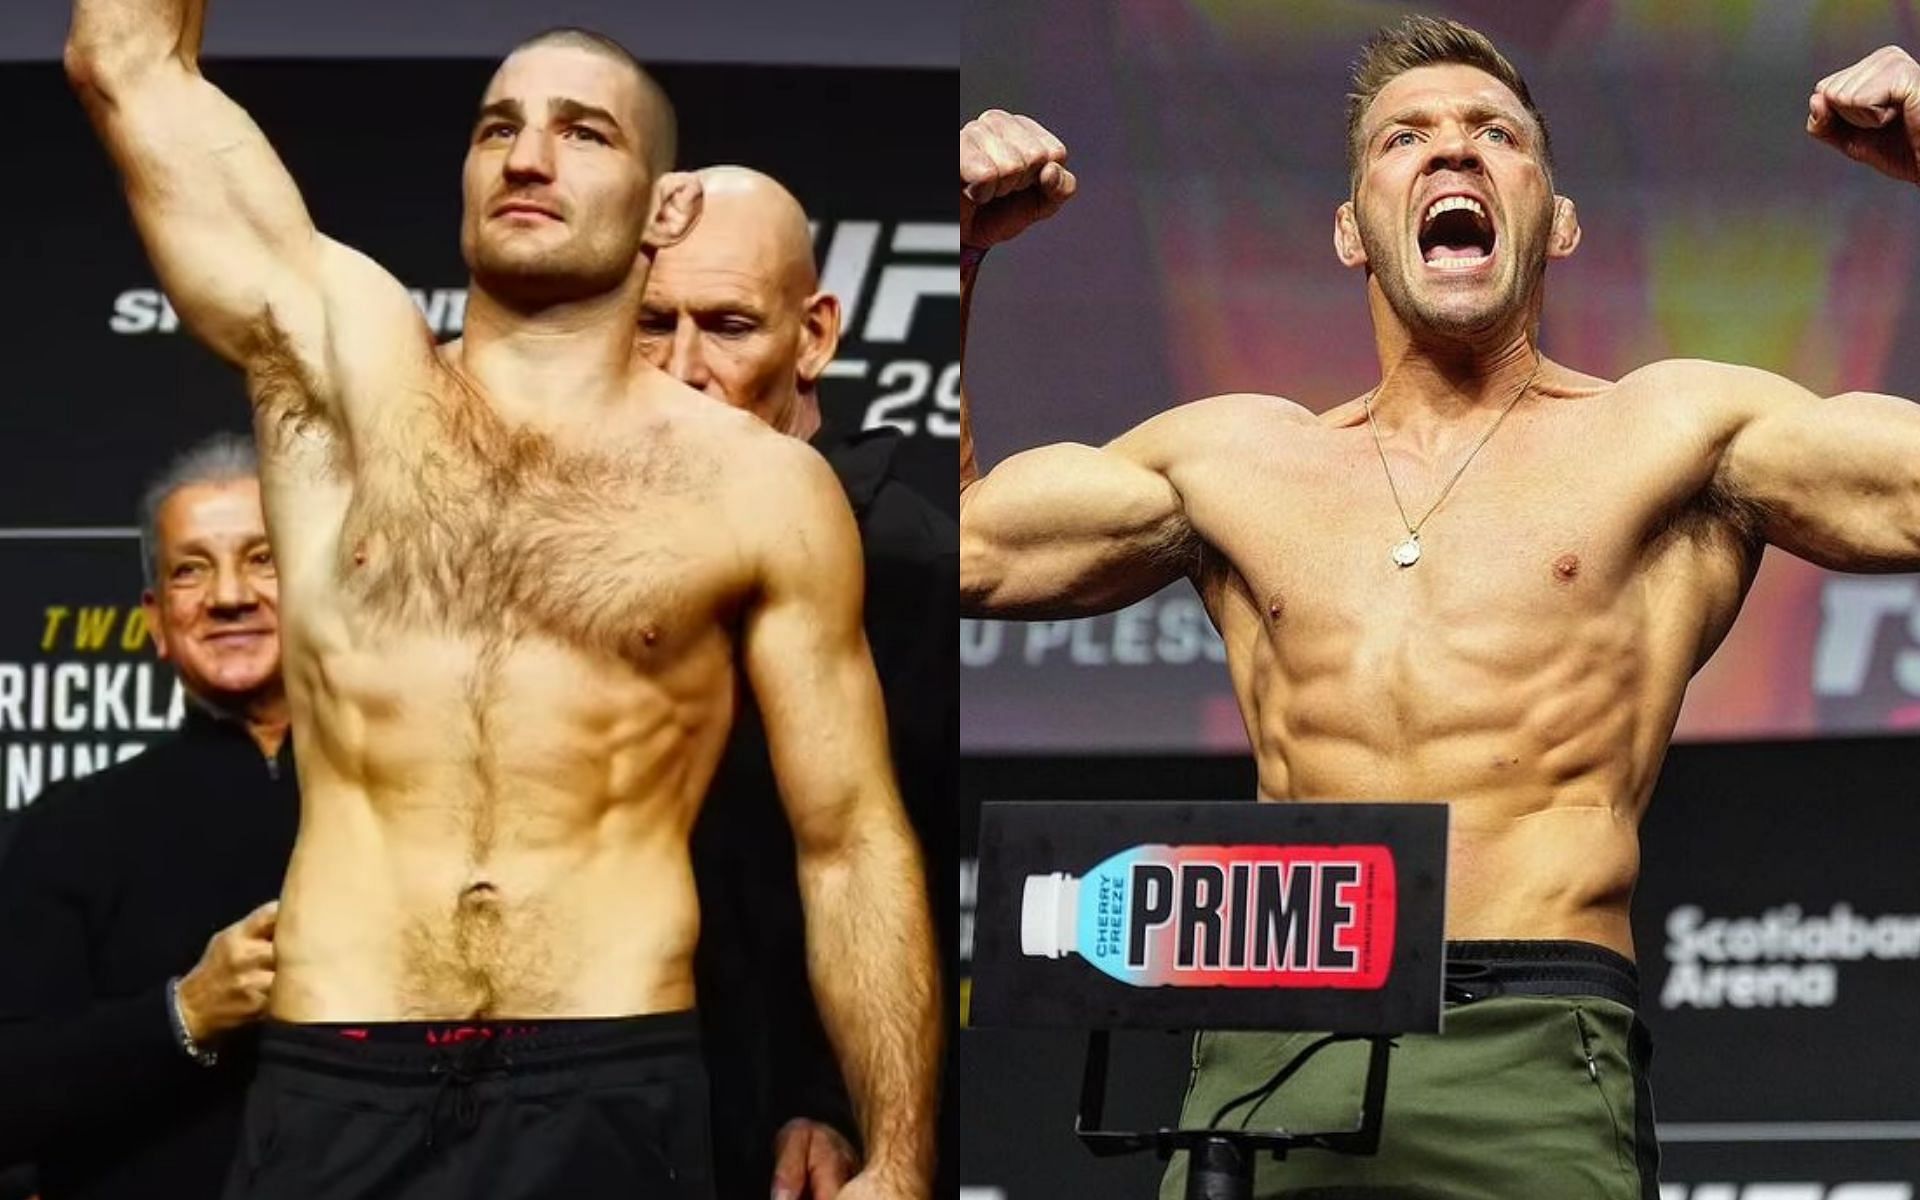 Sean Strickland (left) sets middleweight record against Dricus du Plessis (right) [Images via @stricklandmma and @dricusduplessis on Instagram]